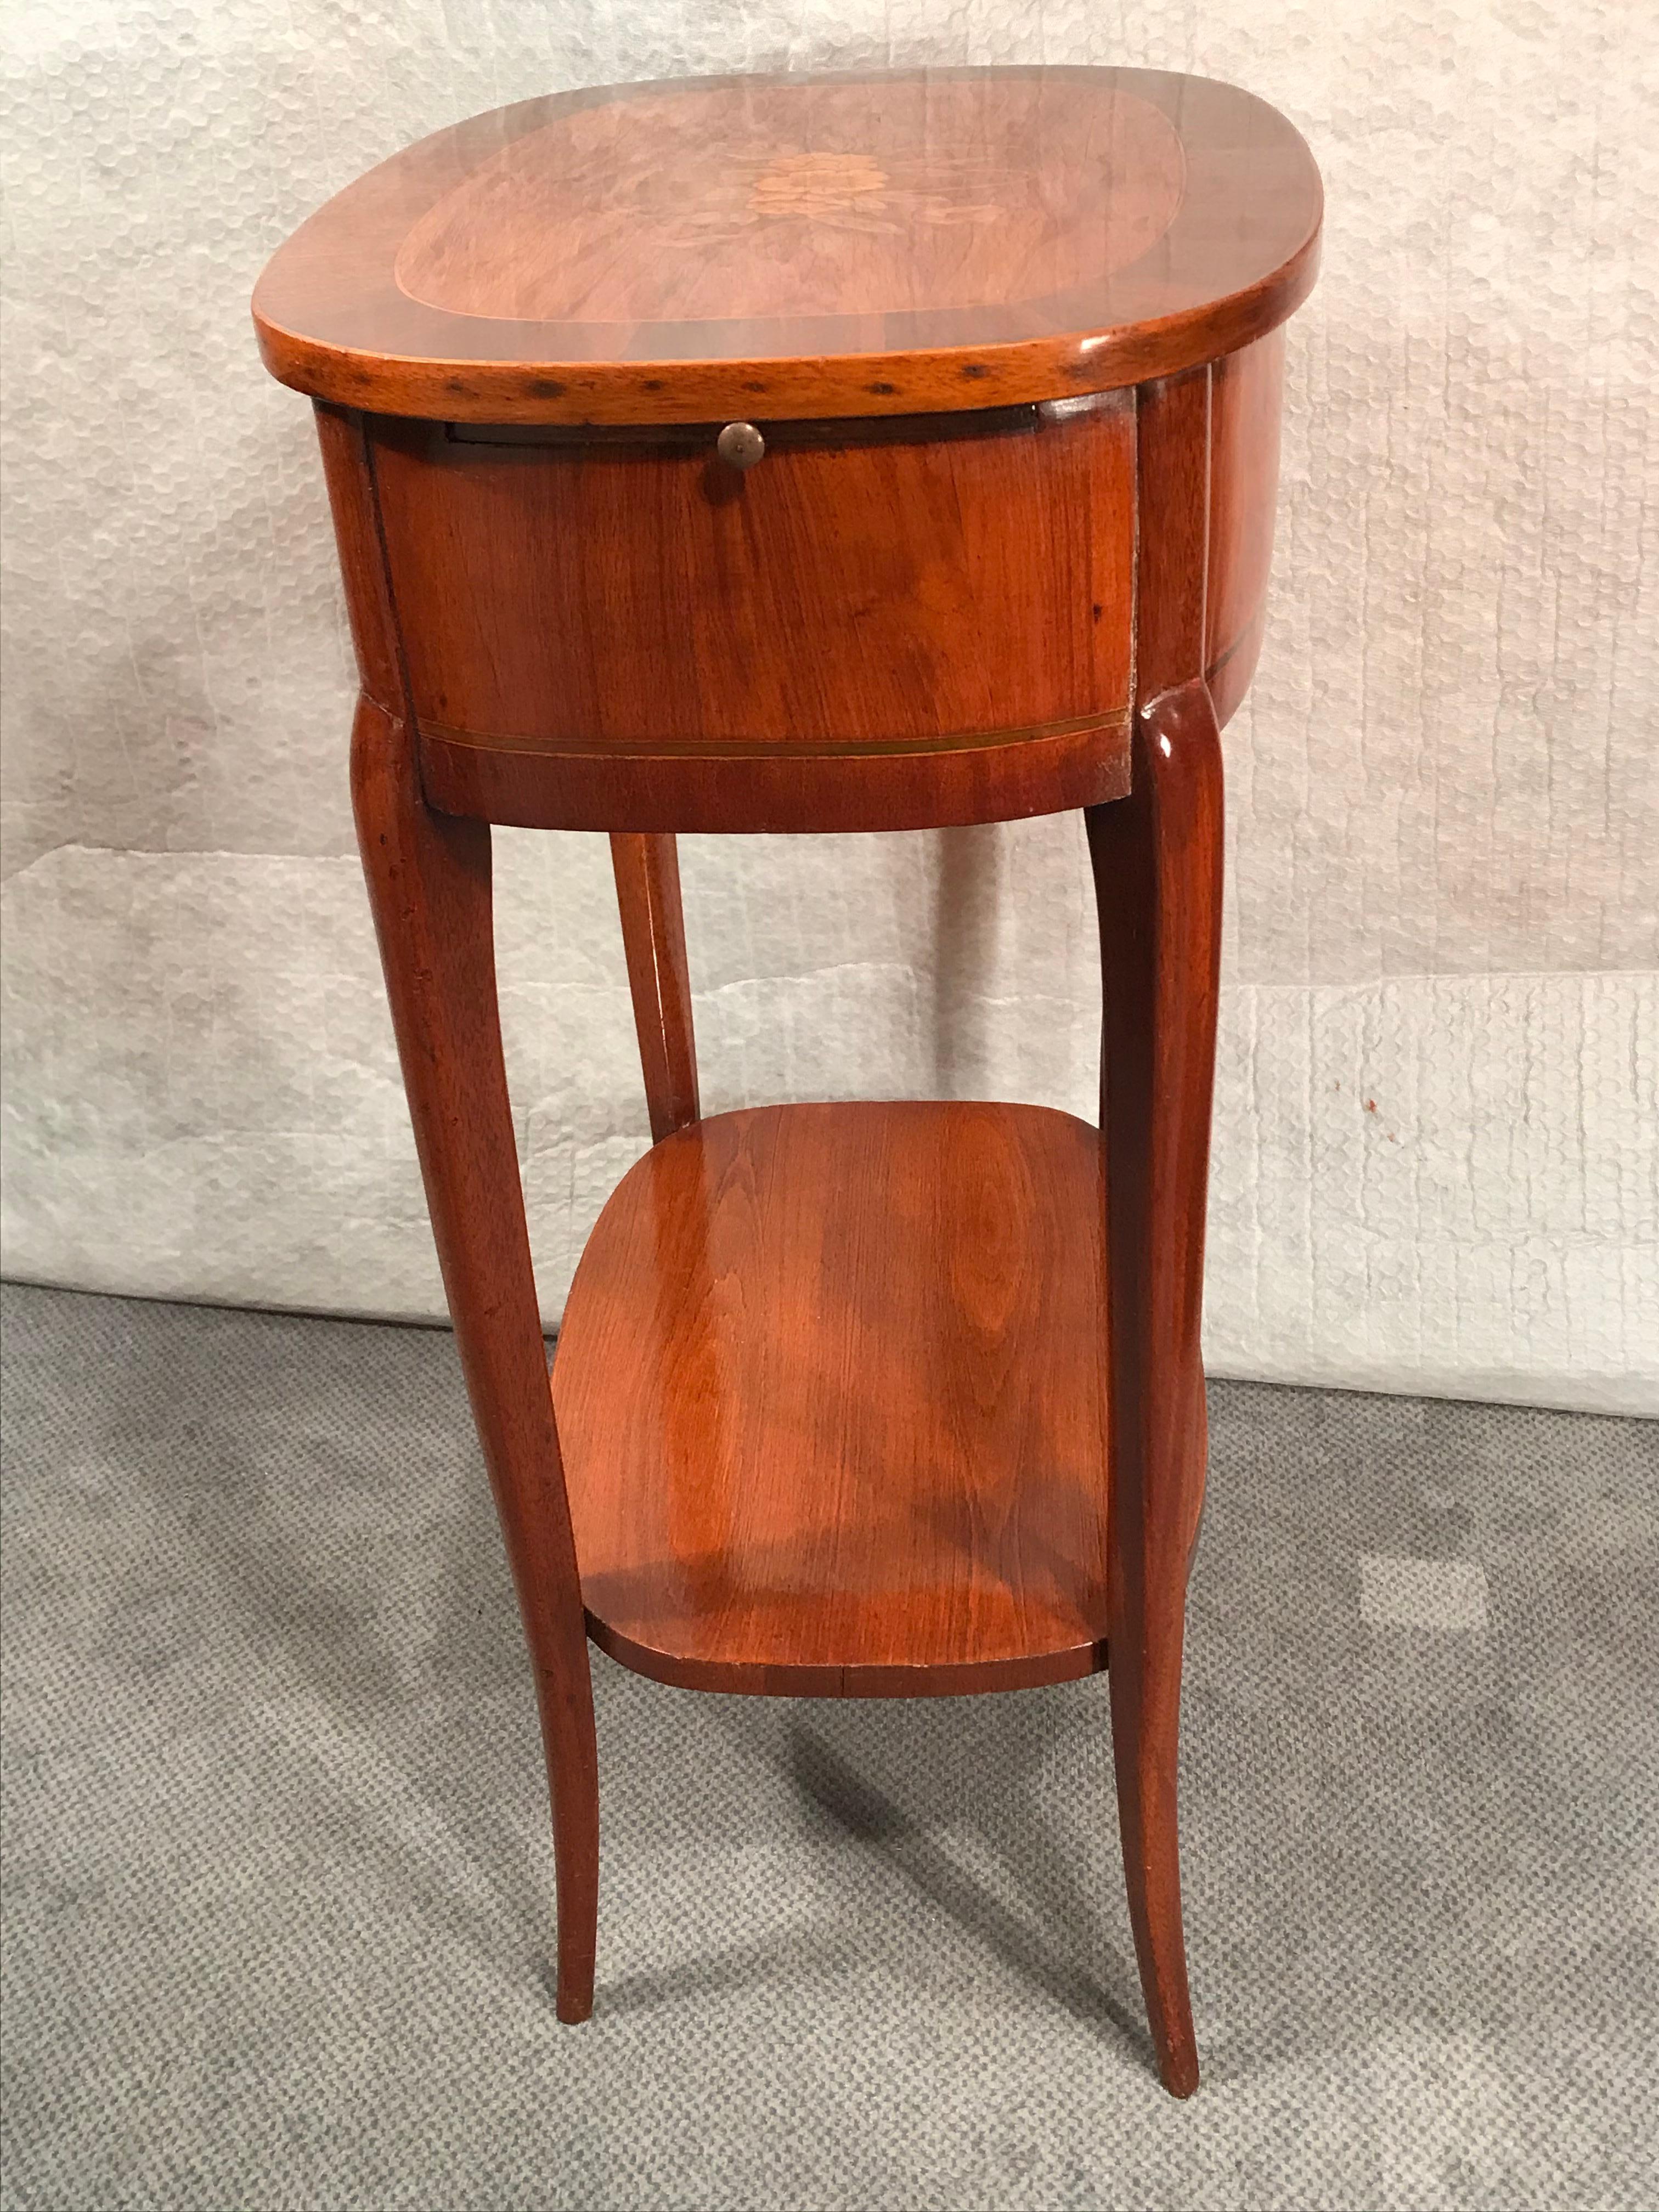 Early 19th Century Side Table, French Restauration Style, 1820